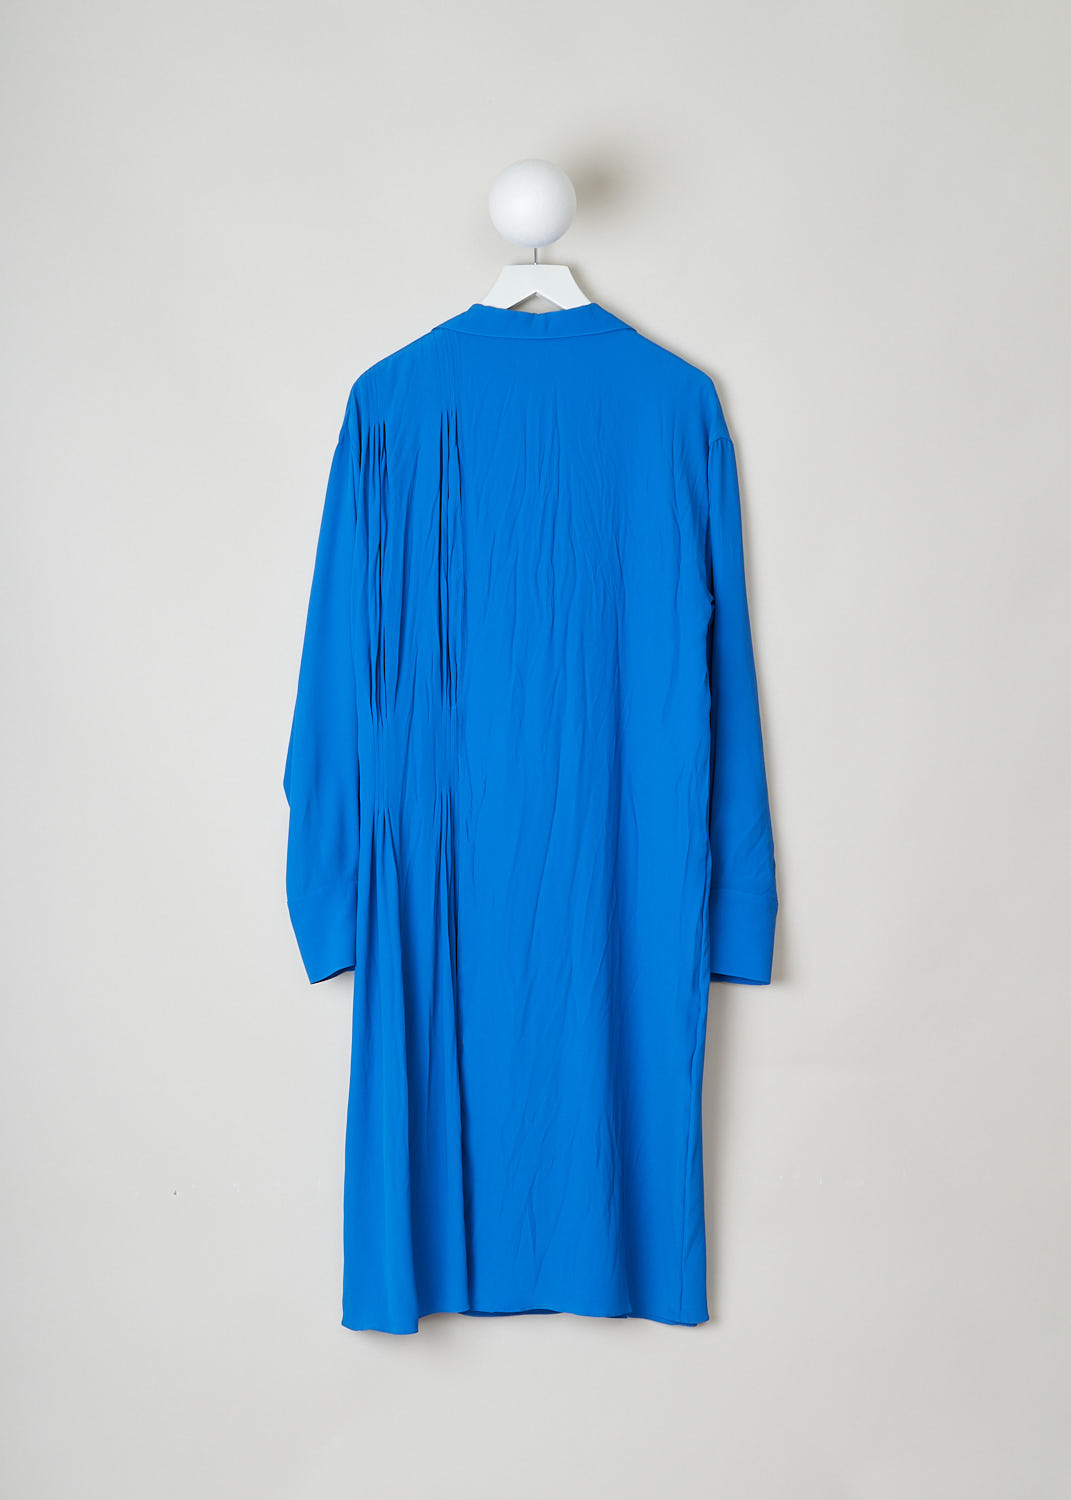 MARNI, ROYAL BLUE ASYMMETRICAL COLLAR DRESS, ABMA0171A0_TA089_00B57, Blue, Back, The royal blue dress features a notched lapel and a split neckline. The long sleeves have buttoned cuffs. The dress is mid-length and has a wider fit. A pleated detail can be found on one side and the dress has a layered skirt. 
